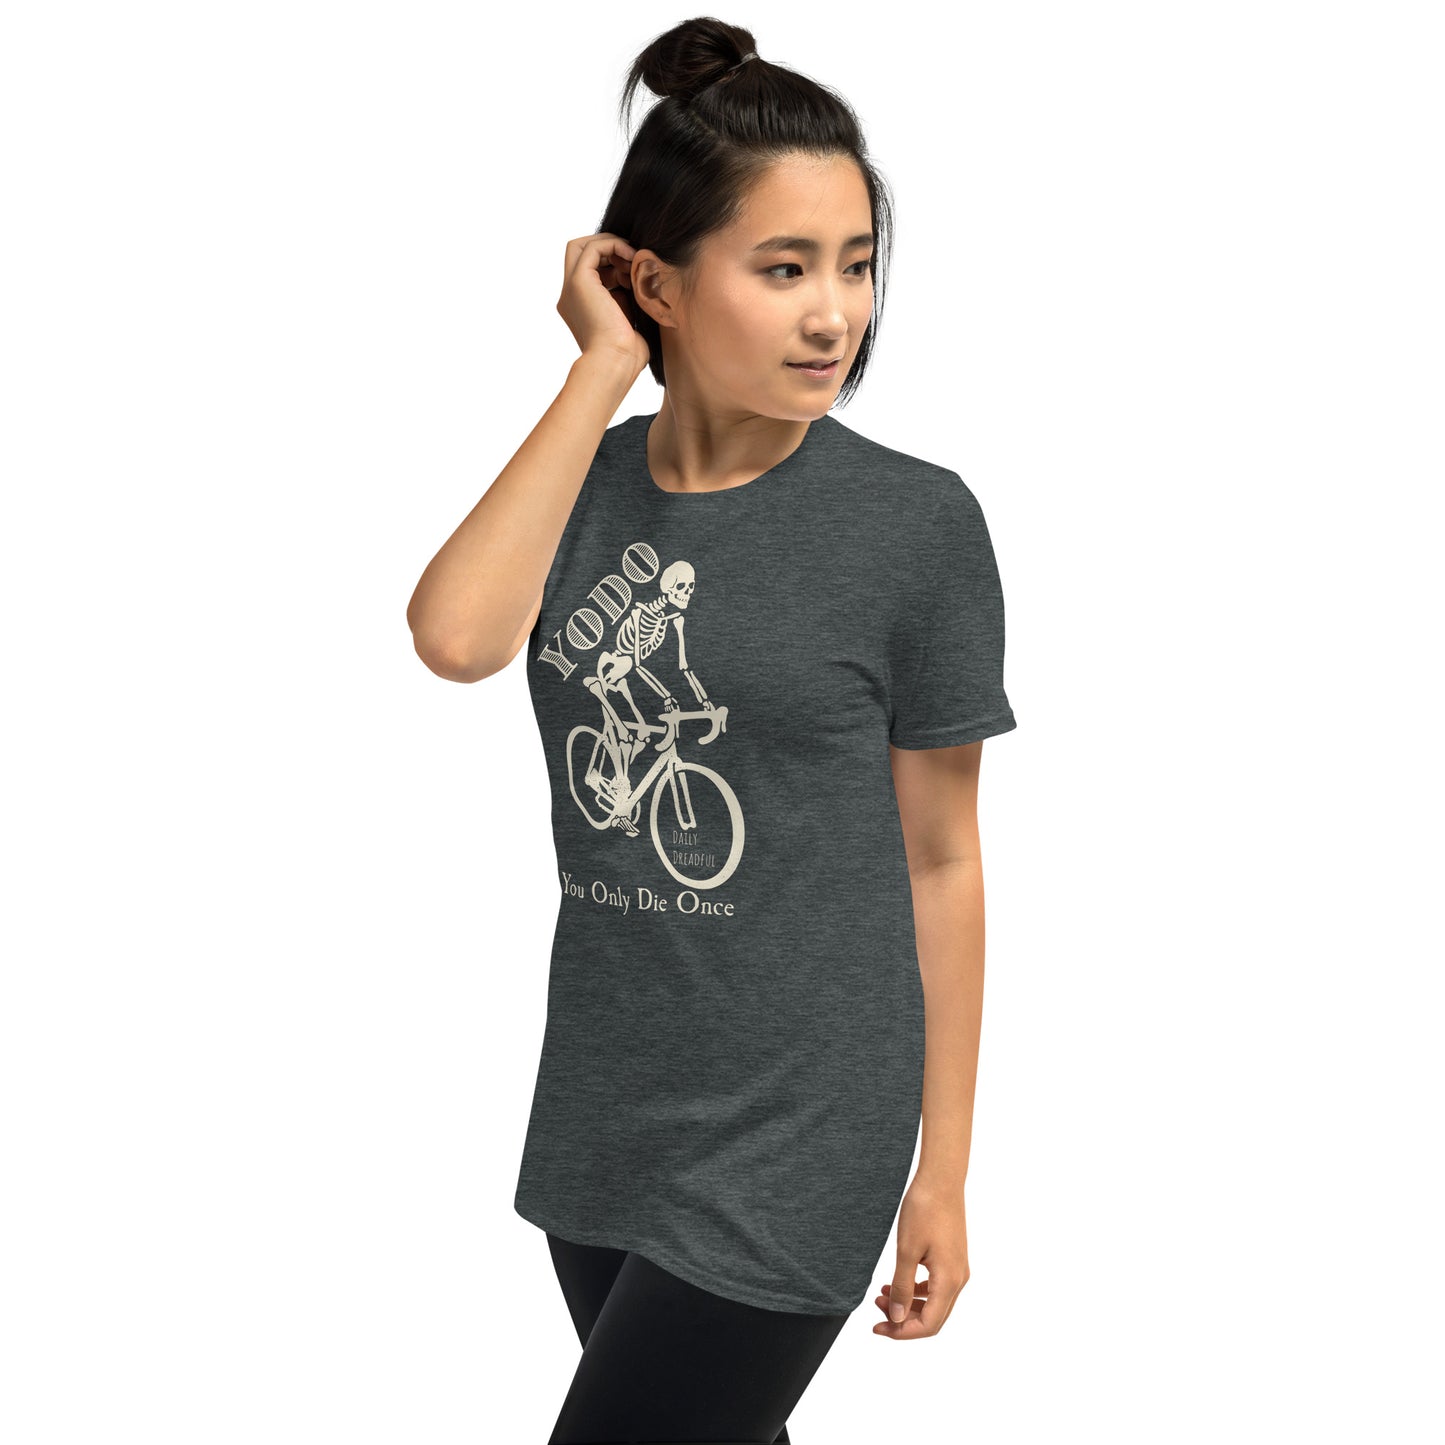 dark heather "YODO" You Only Die Once Unisex Short-Sleeve T-shirt from Daily Dreadful